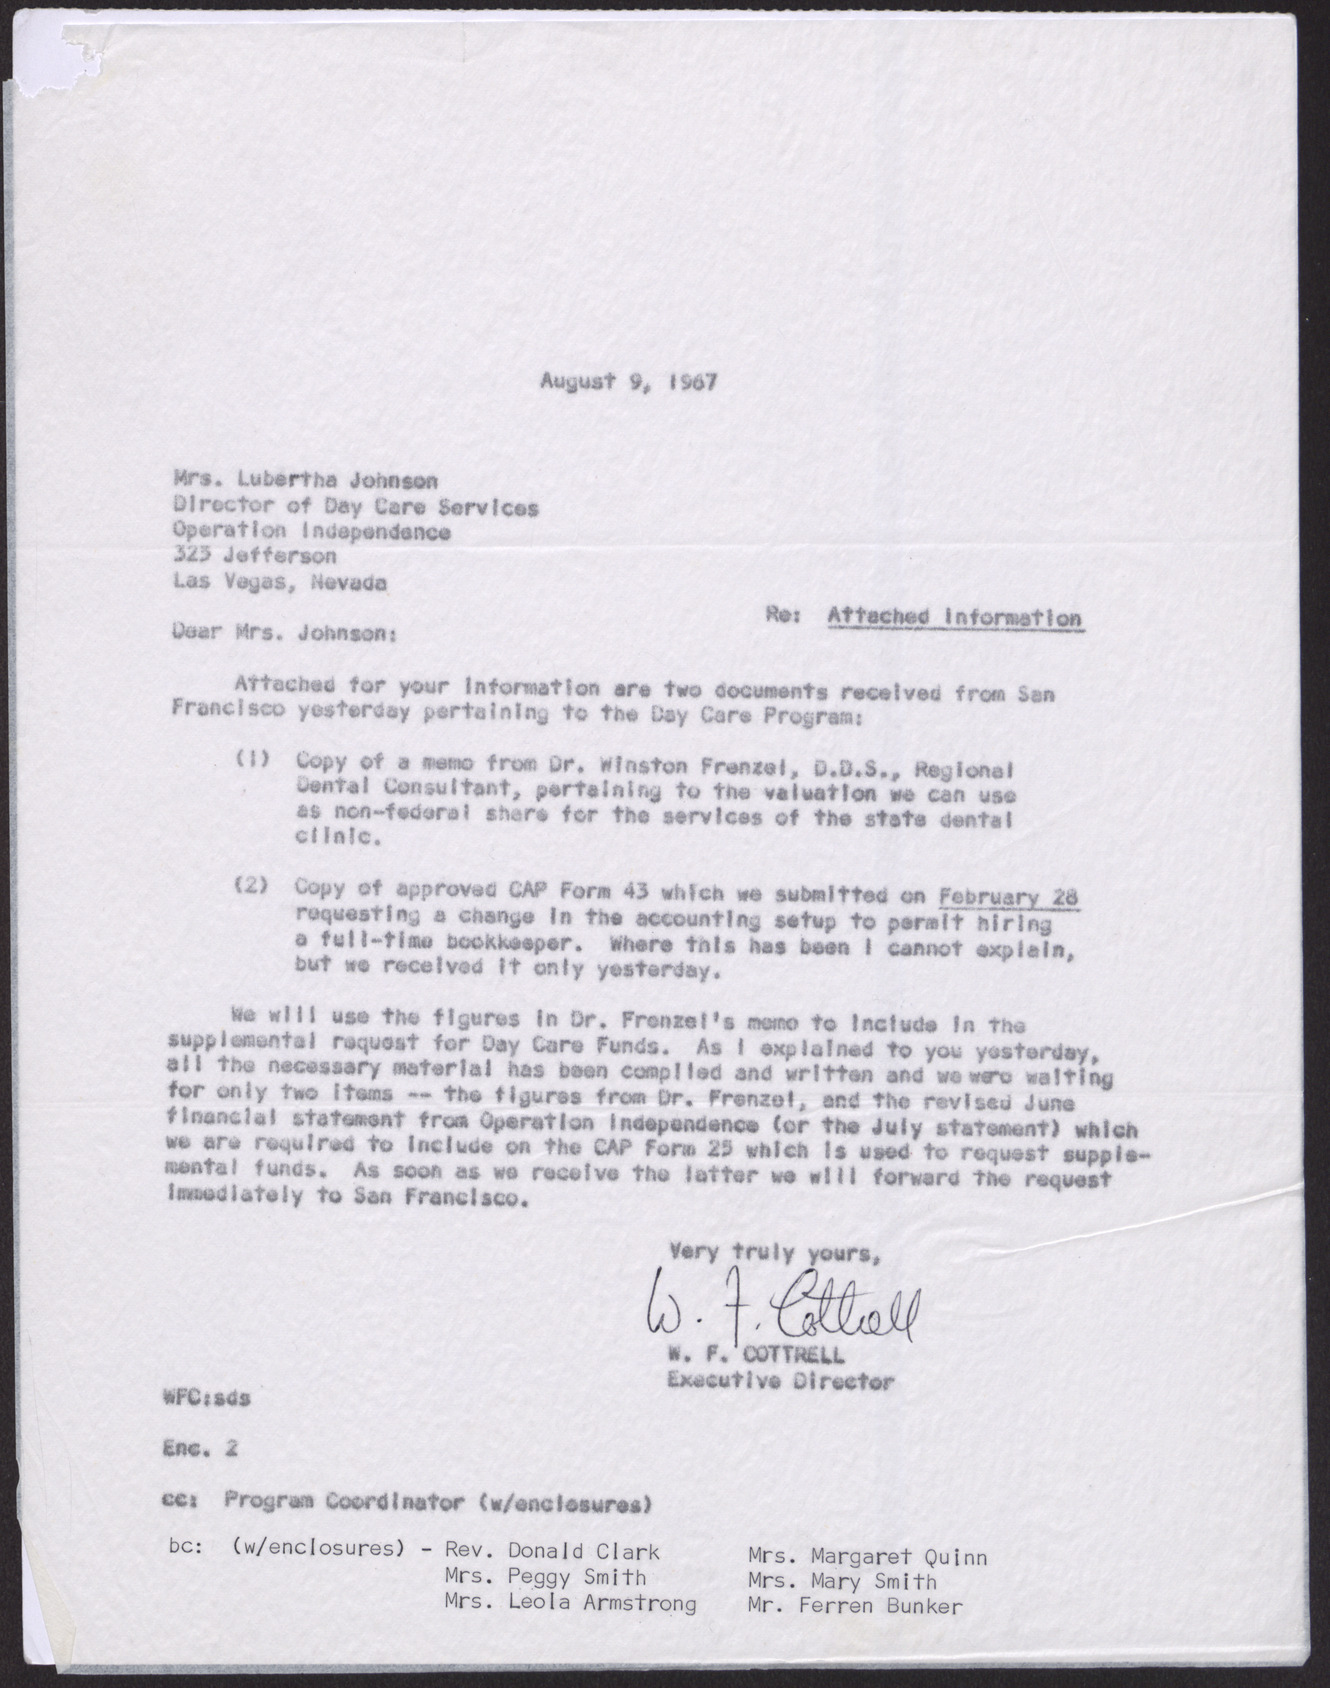 Letter to Mrs. Lubertha Johnson from W. F. Cottrell, August 9, 1967